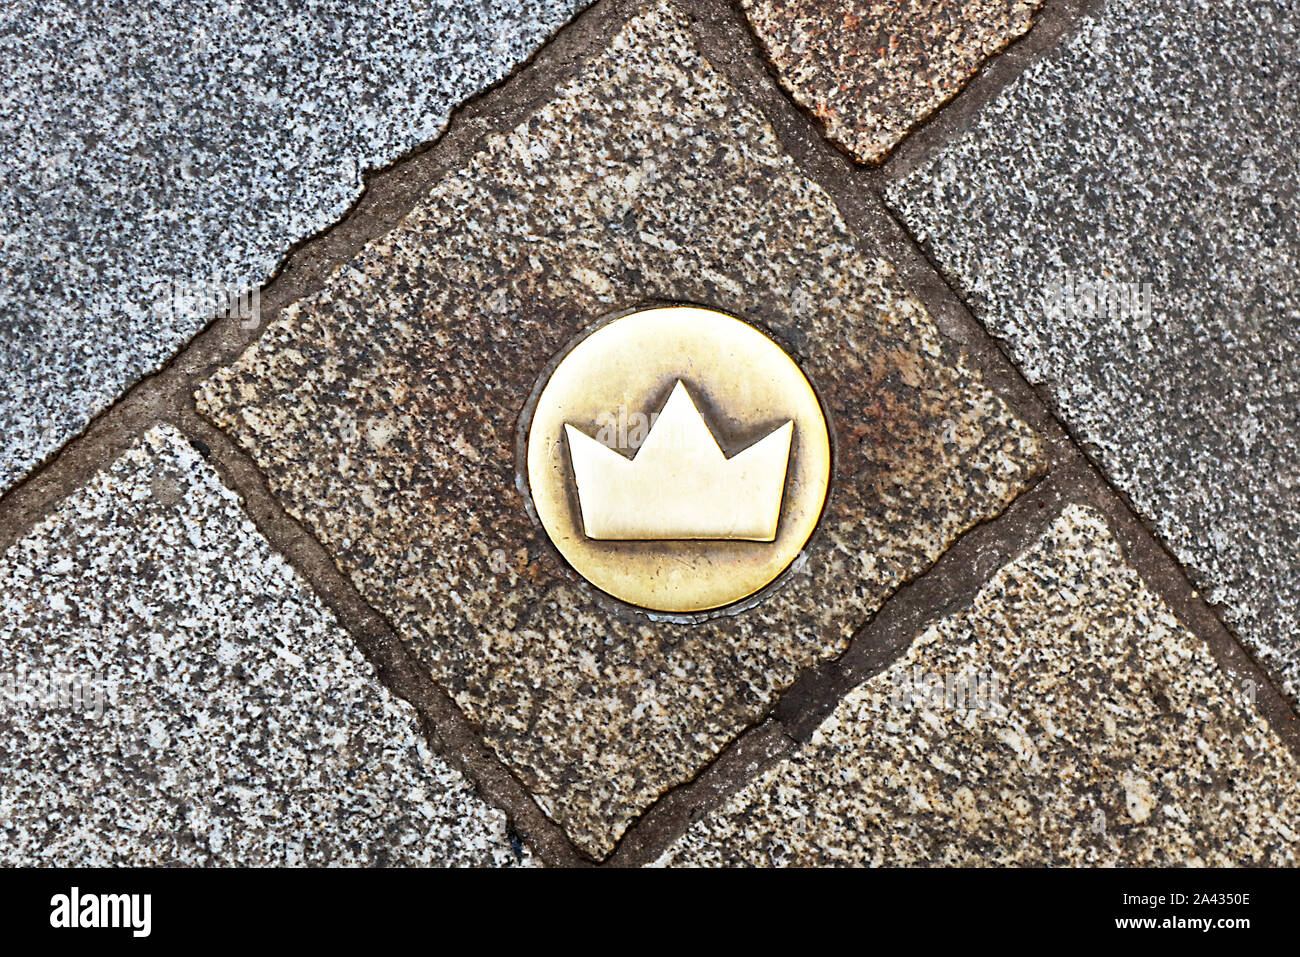 https://c8.alamy.com/comp/2A4350E/top-view-of-brass-crown-marker-in-cobblestone-streets-that-shows-location-of-the-coronation-walk-bratislava-slovakia-old-town-2A4350E.jpg